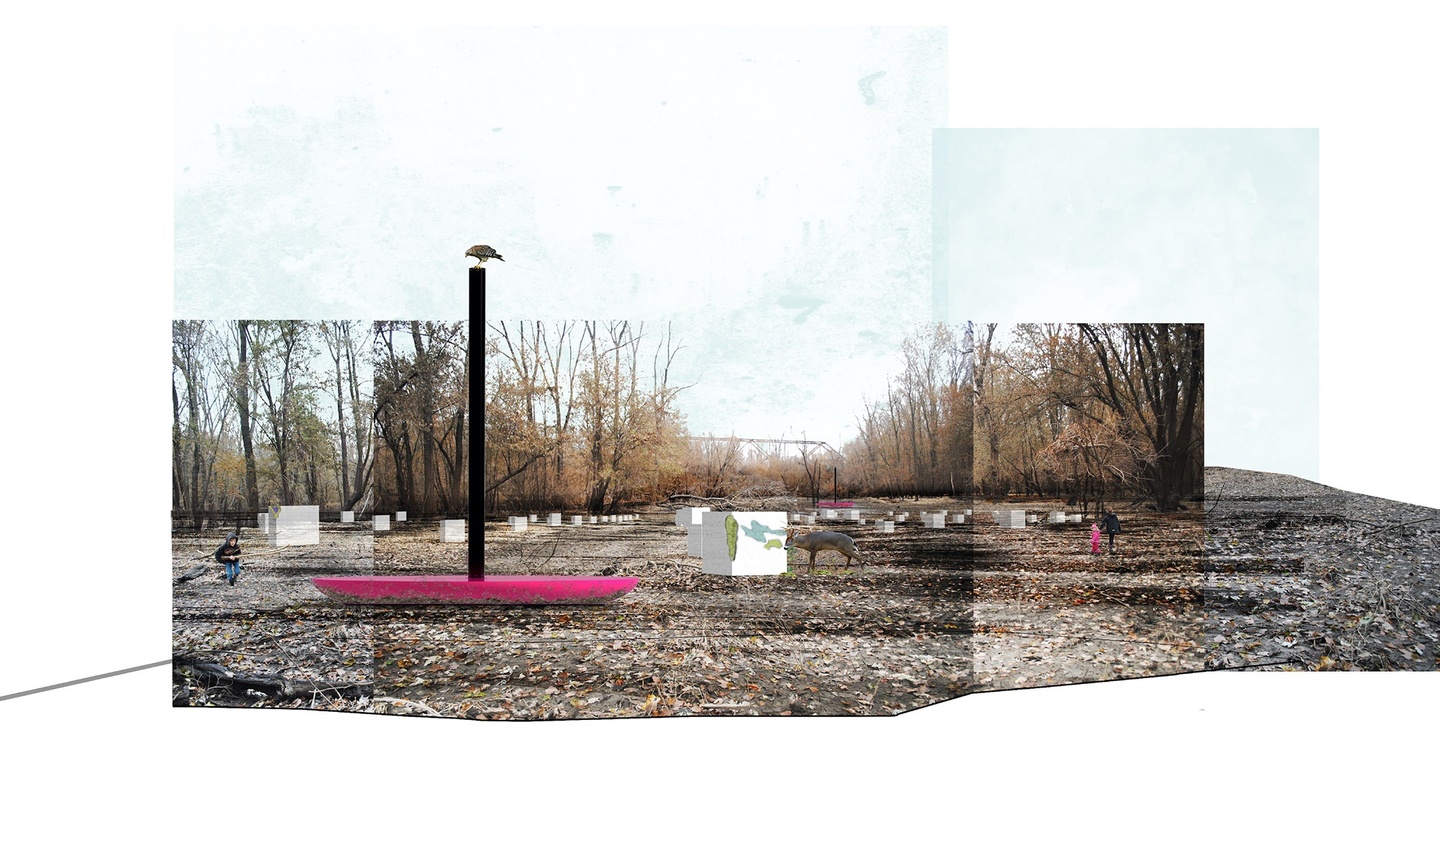 Rendered image of a barren gravelly area with a giant pink plate on the left